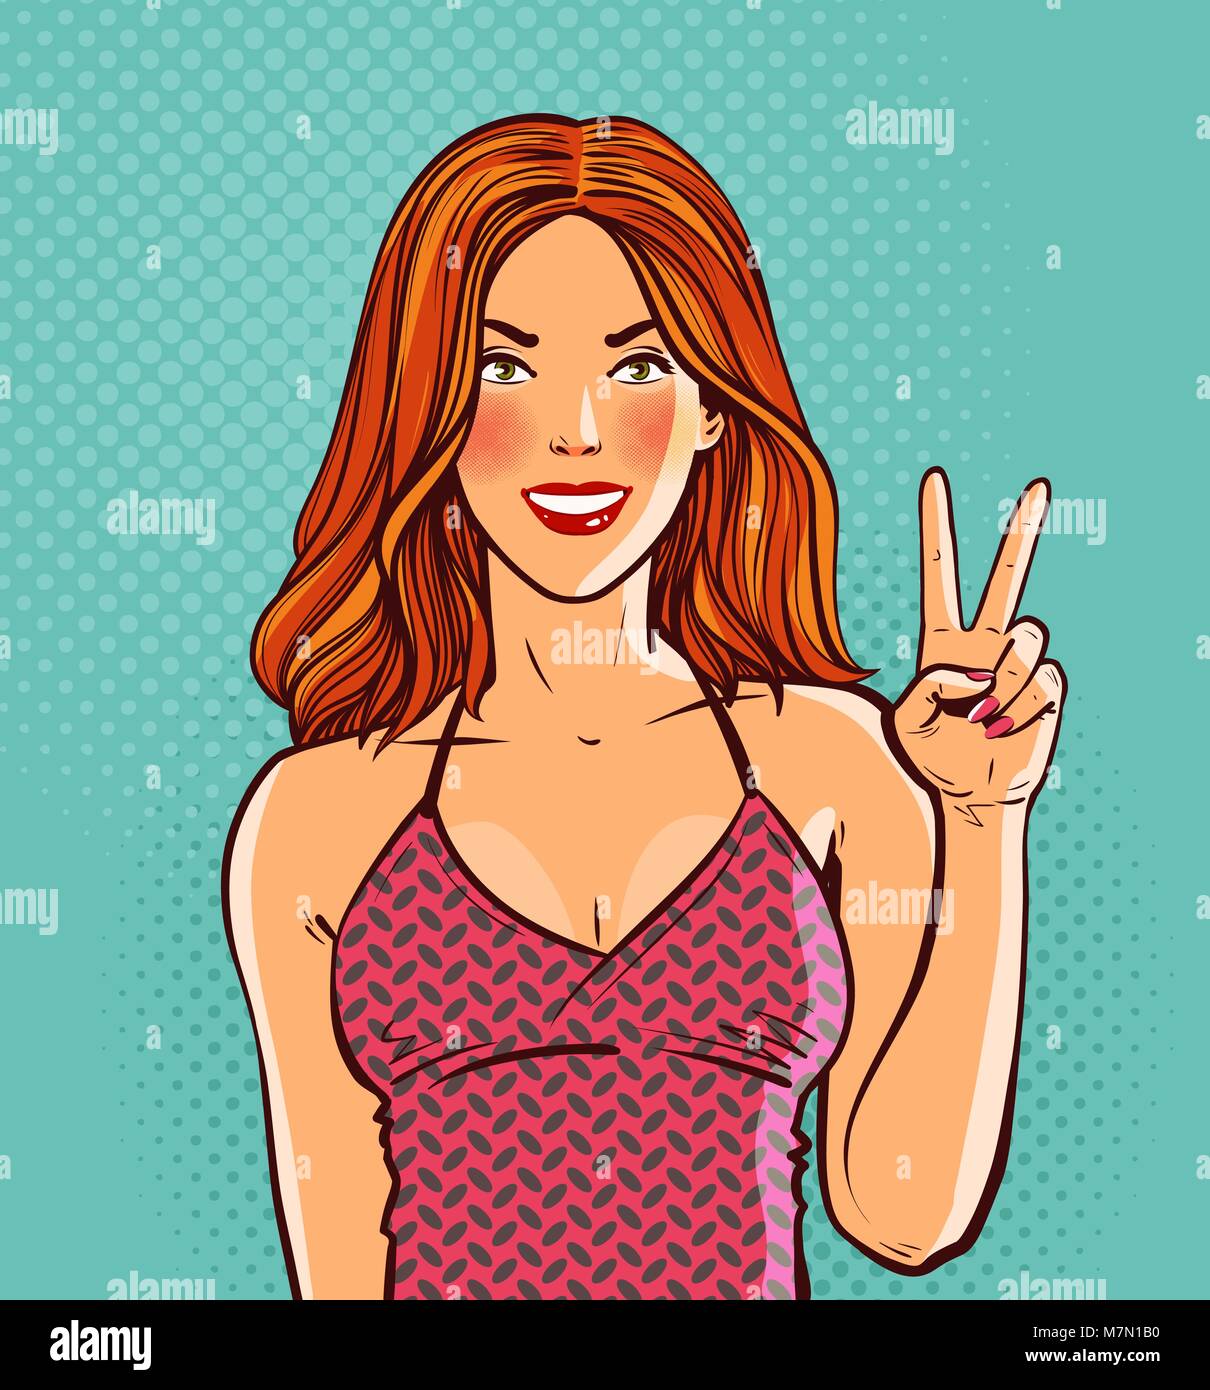 Beautiful redhead girl. Hand gesture is symbol of victory or peace. Pop art retro comic style. Cartoon vector illustration Stock Vector